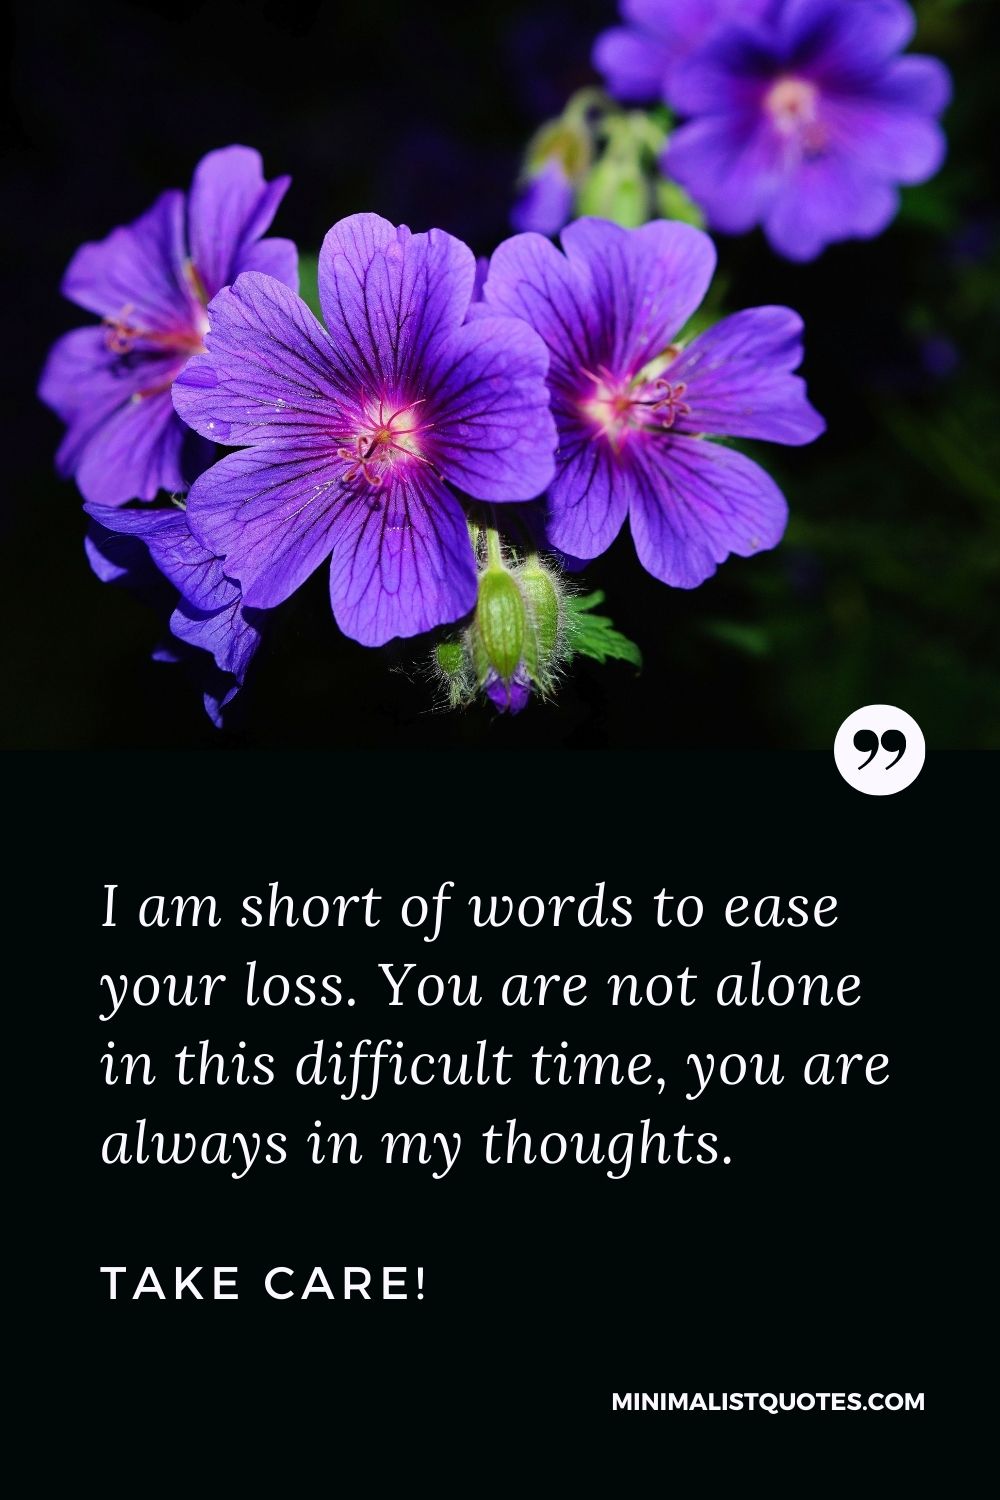 Divorce Quote, Sympathy & Message With Image: I am short of words to ease your loss. You are not alone in this difficult time, you are always in my thoughts. Take Care!